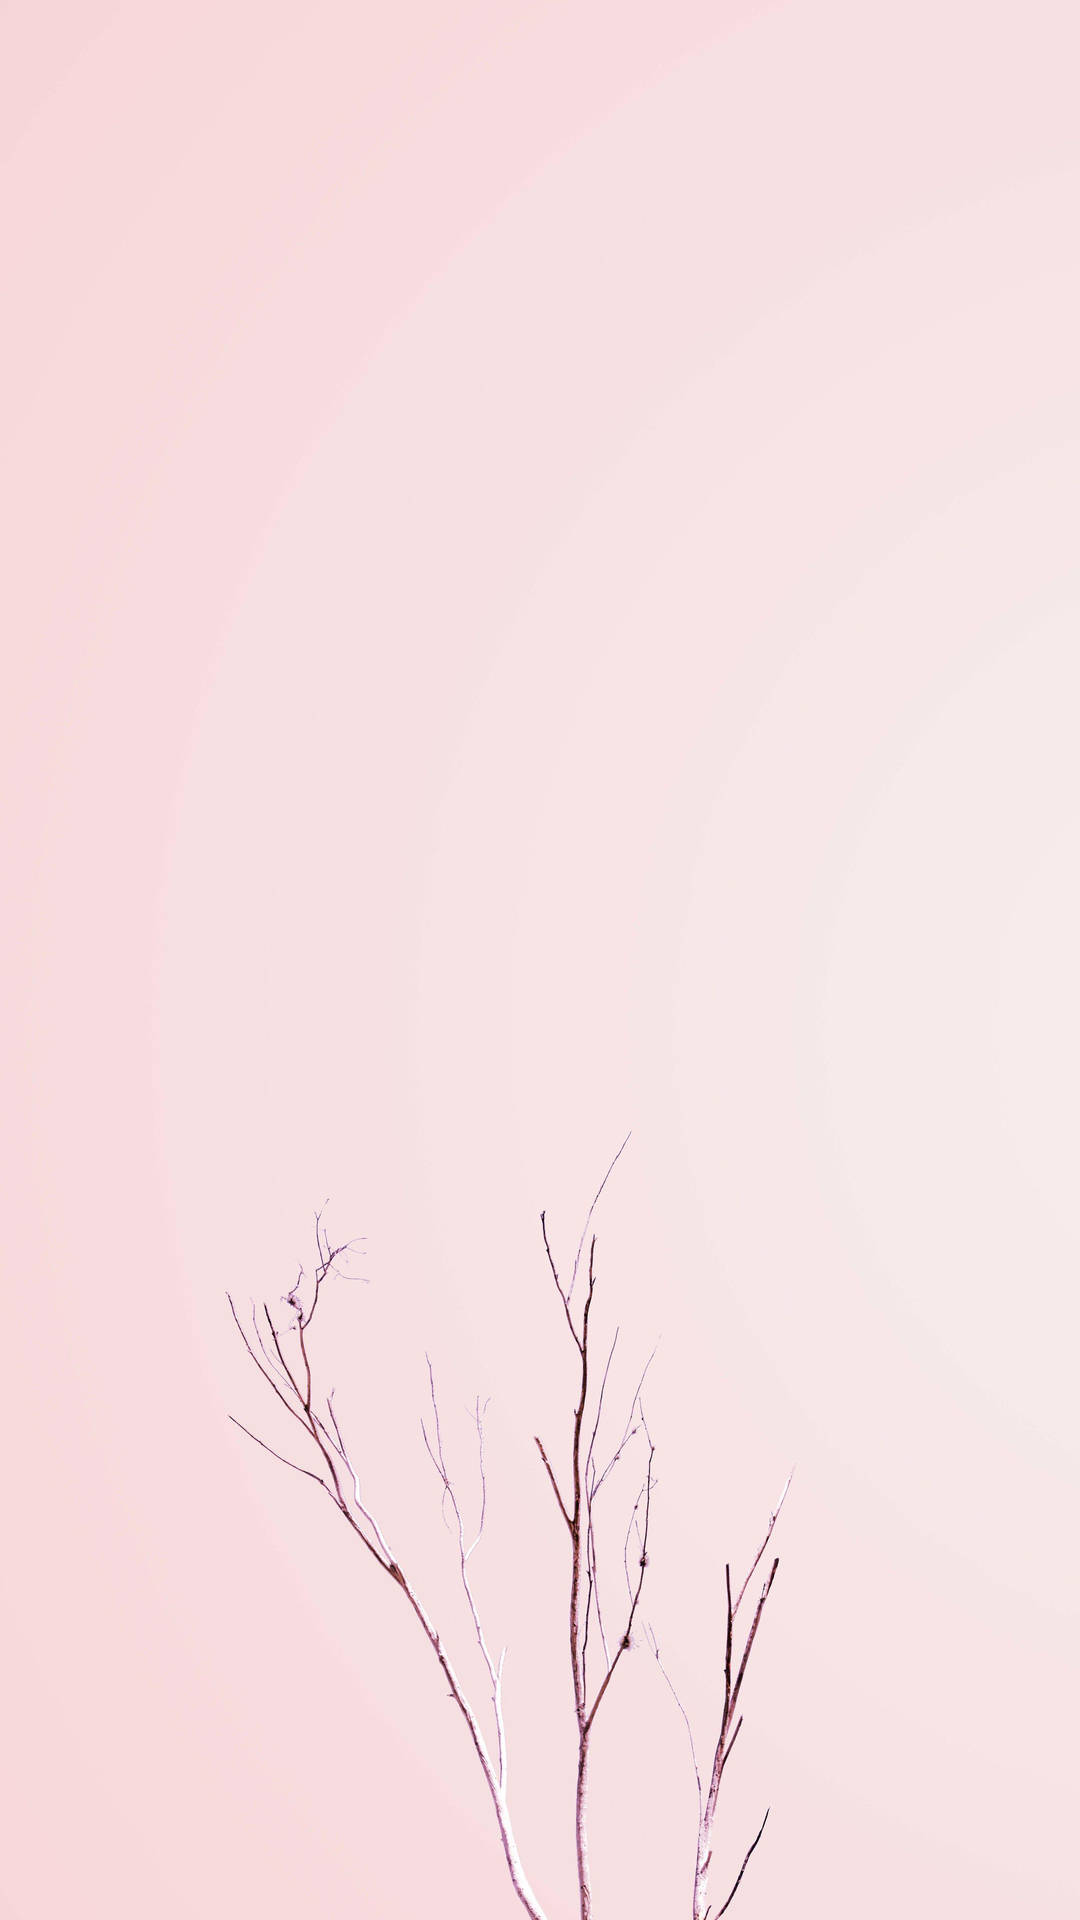 Minimalist Aesthetic Pink Tree Branches Background